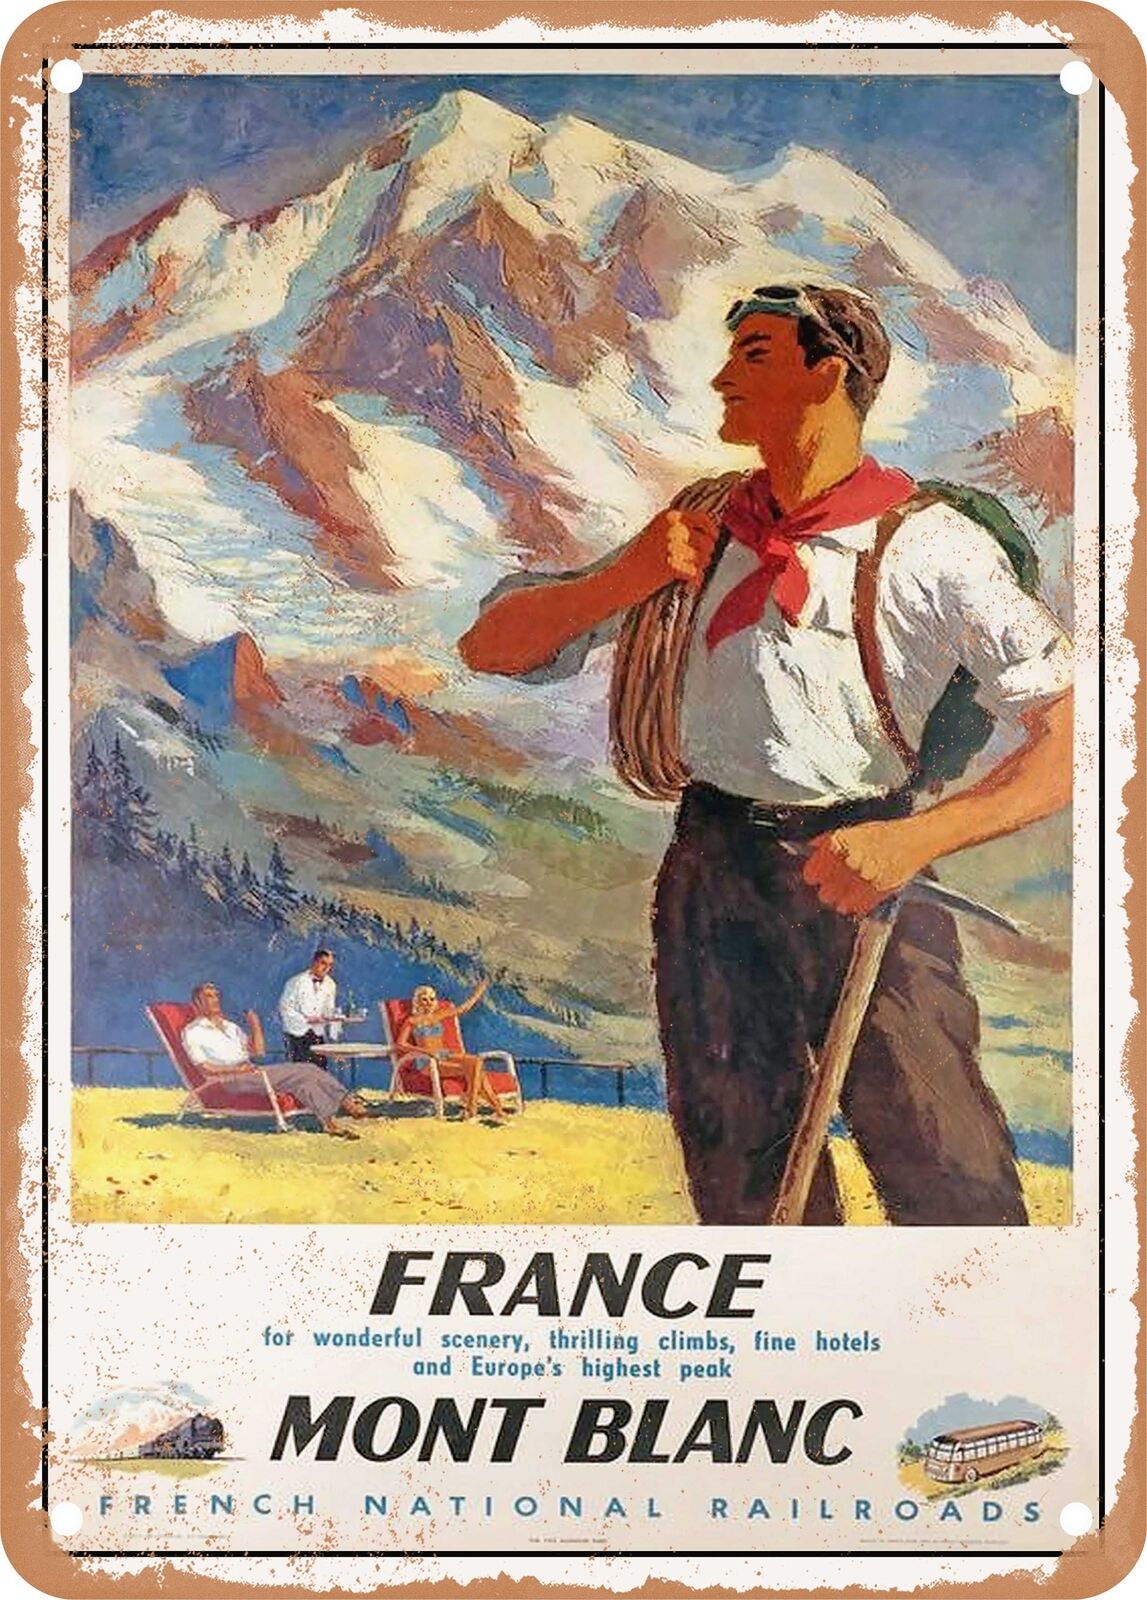 METAL SIGN - 1948 France Mont Blanc French National Railroads Vintage Ad